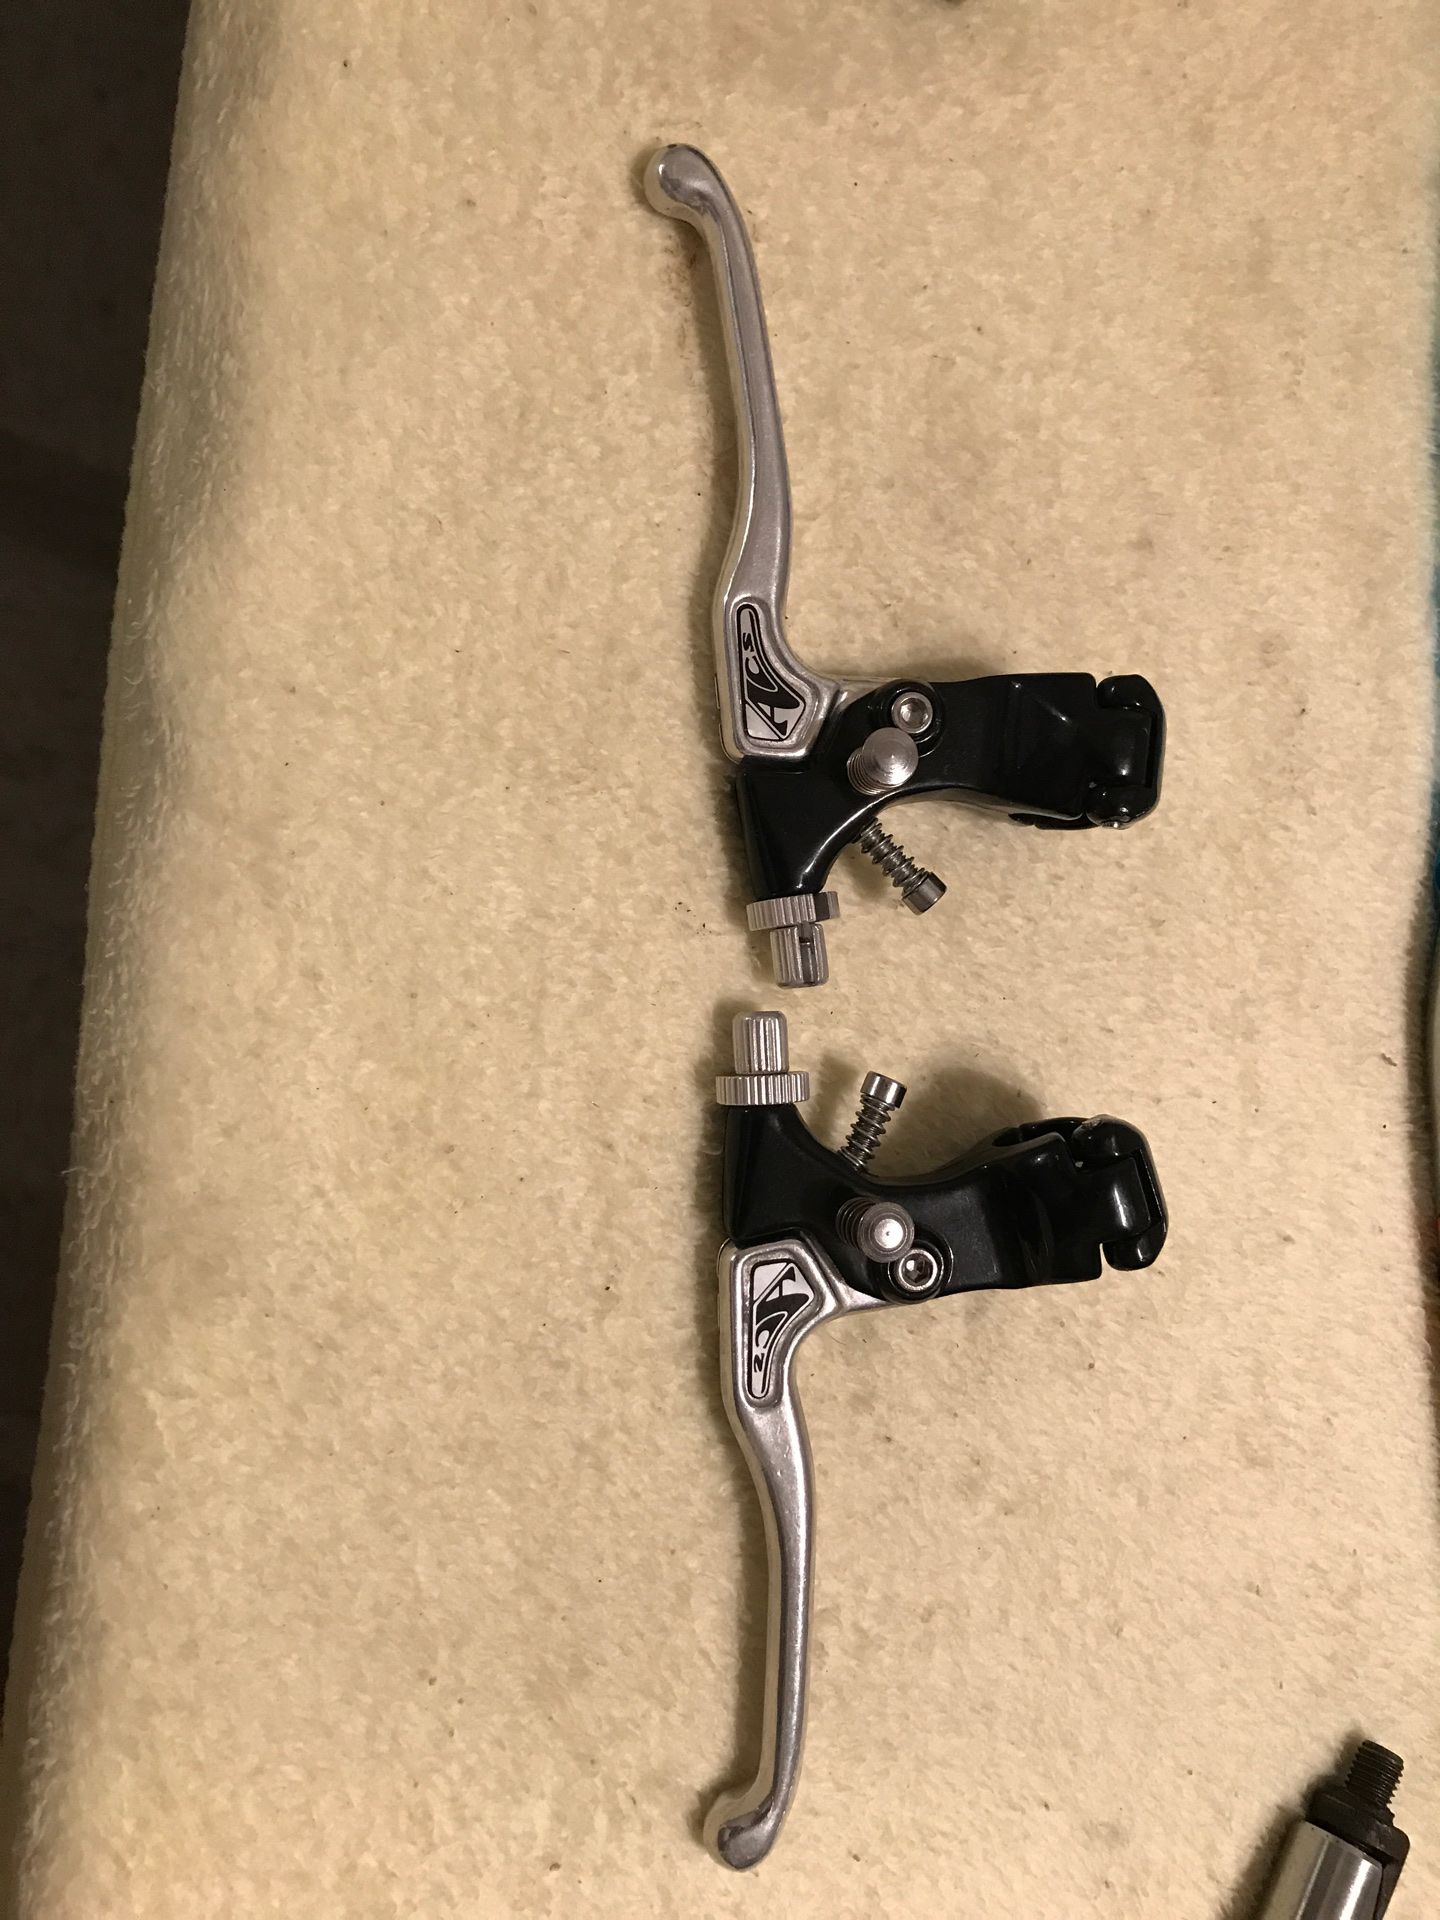 NOS Acs freestyle levers